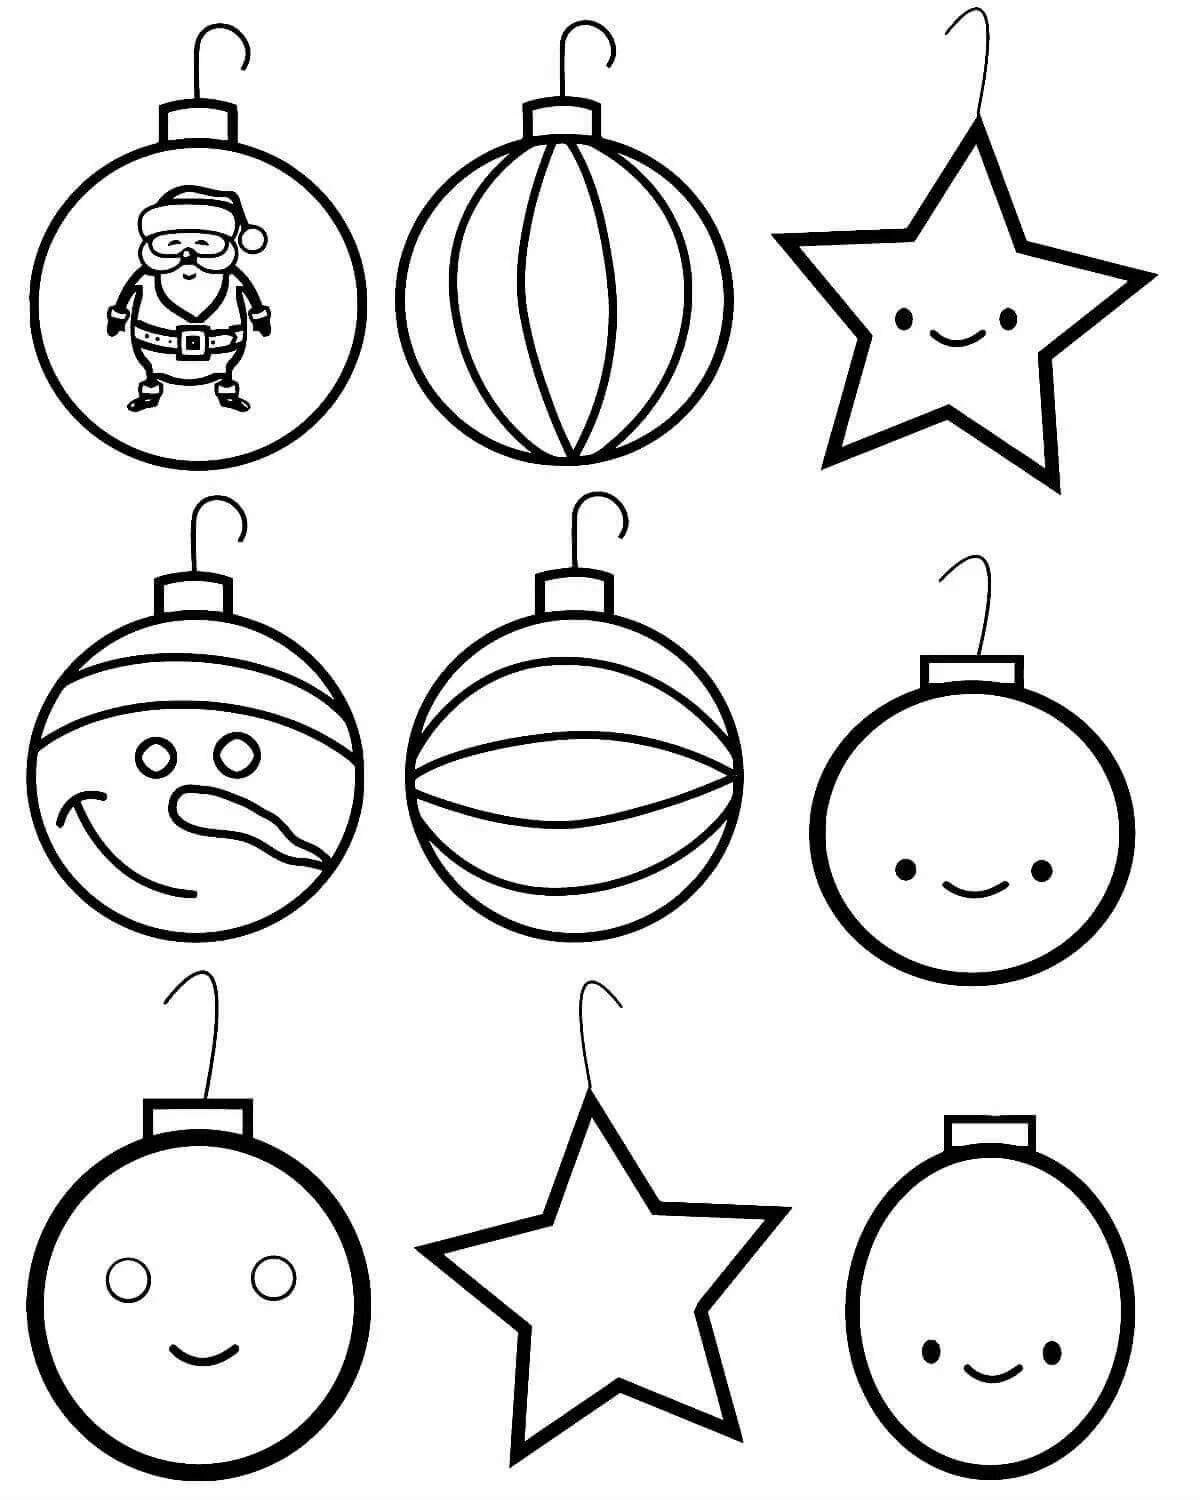 Whimsical Christmas decorations for 5-6 year olds